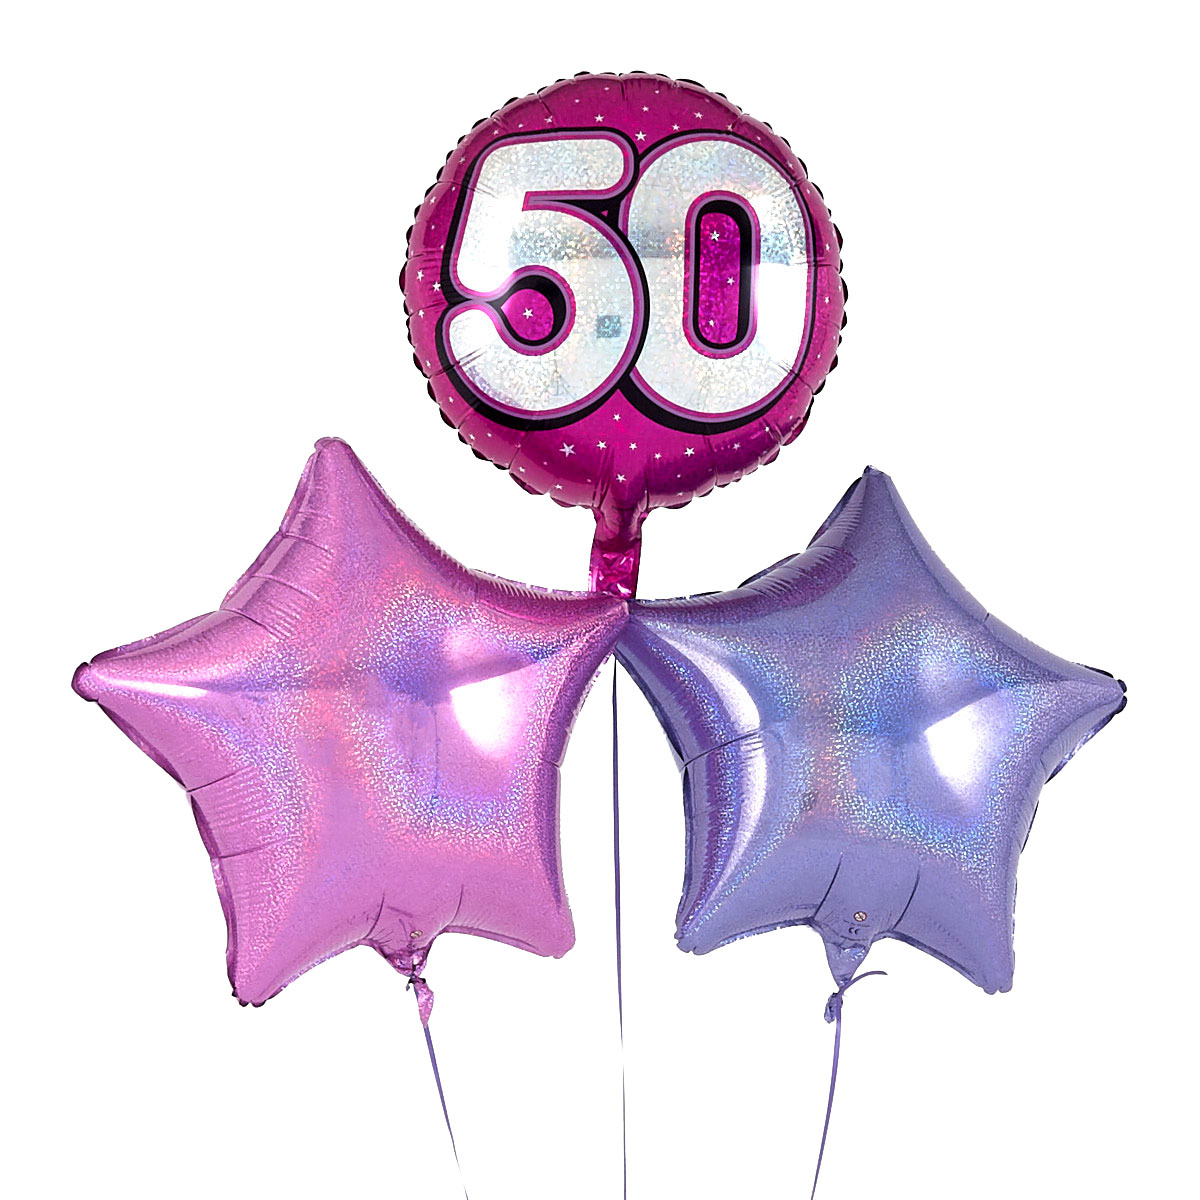 Pink 50th Birthday Balloon Bouquet - DELIVERED INFLATED!